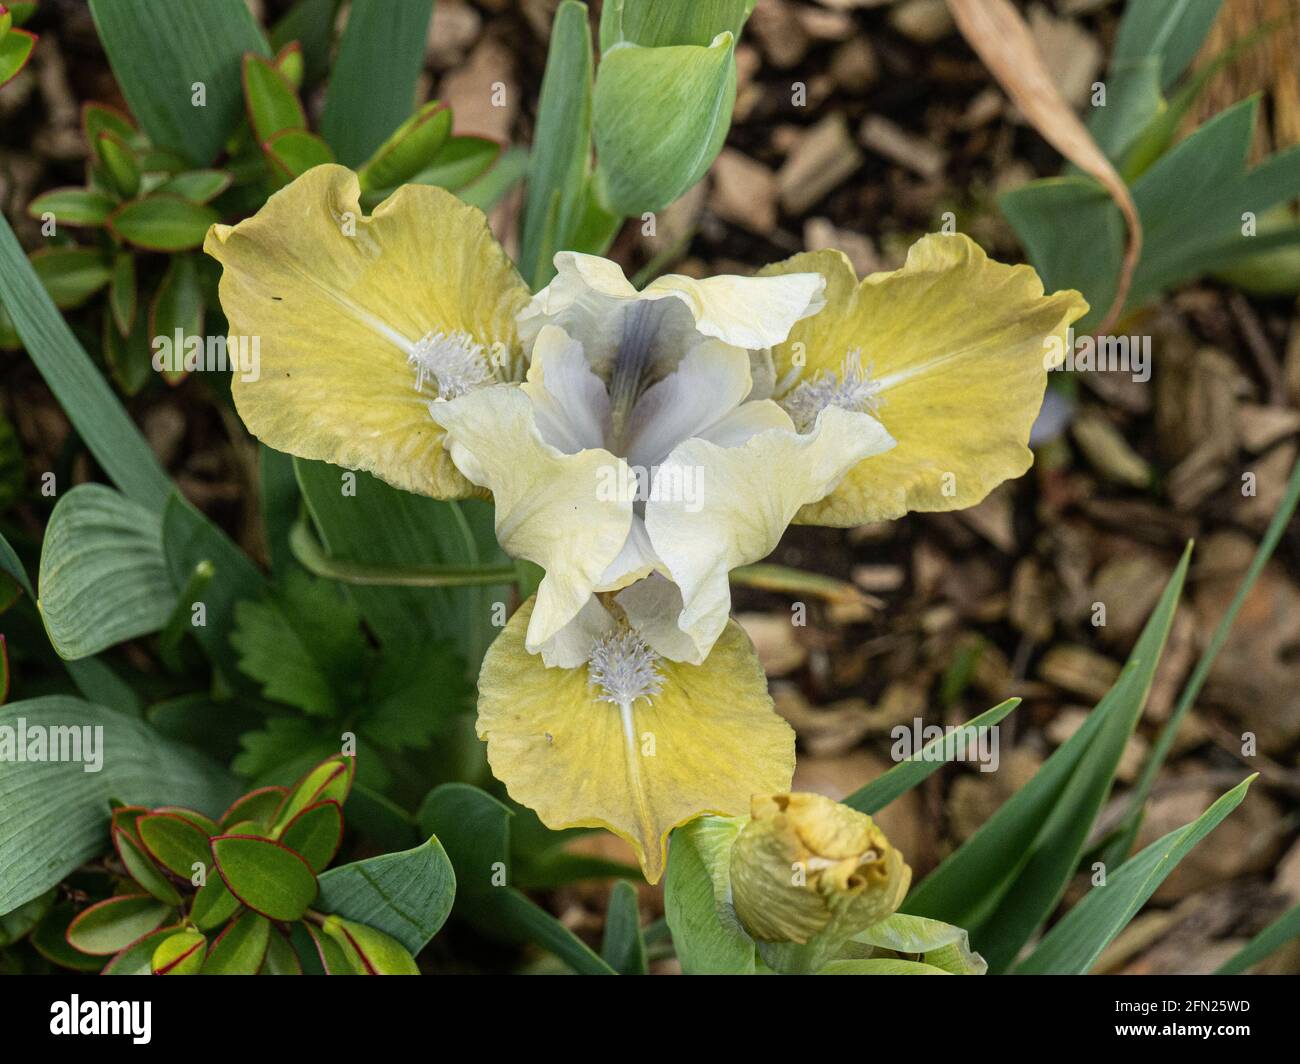 A close up of a single flower of the dusky yellow and white dwarf Iris Mrs Nate Rudolph Stock Photo